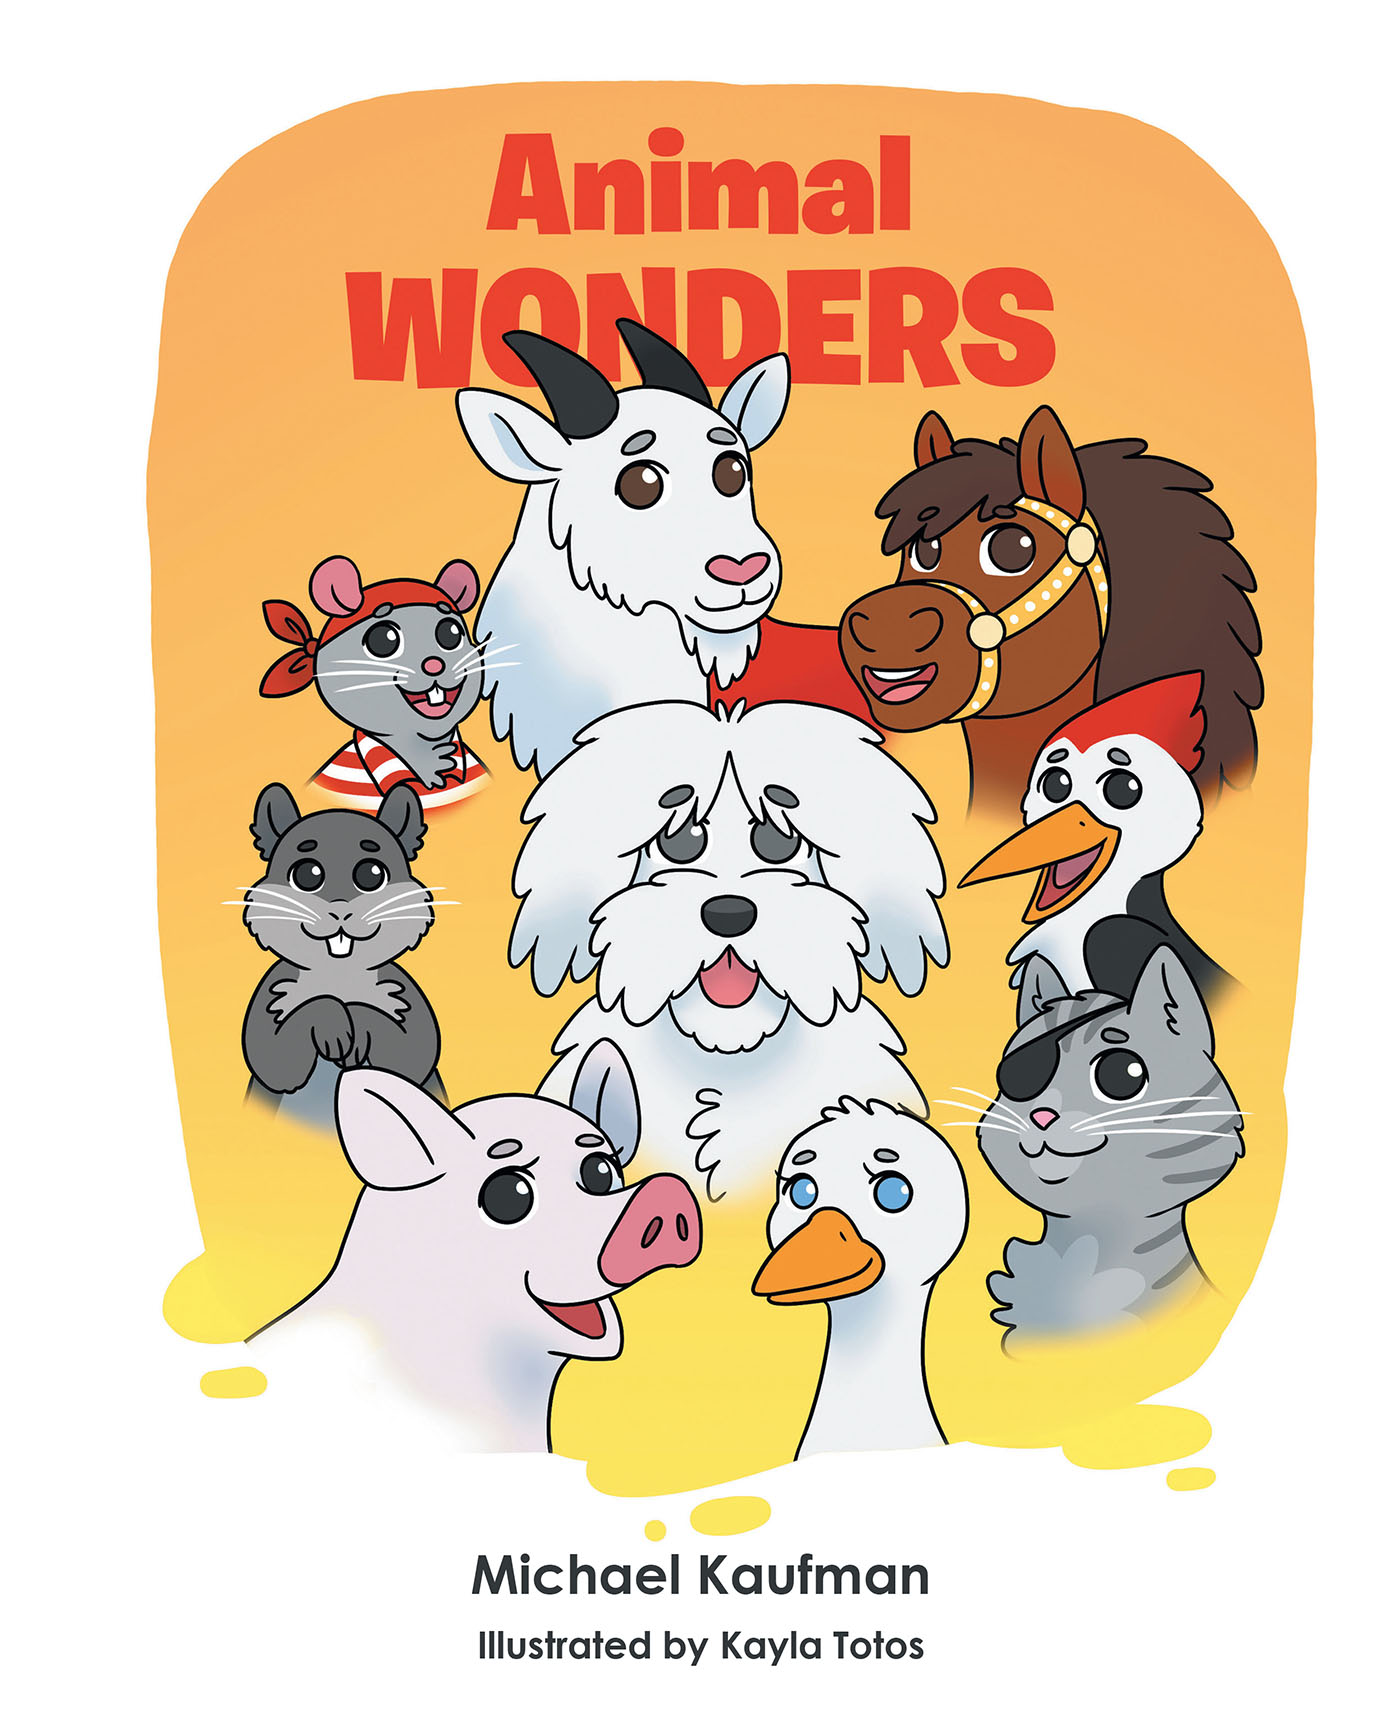 Author Michael Kaufman’s New Book, "Animal Wonders," is a Collection of Fun and Happy Children’s Short Stories About Different Interesting Animals